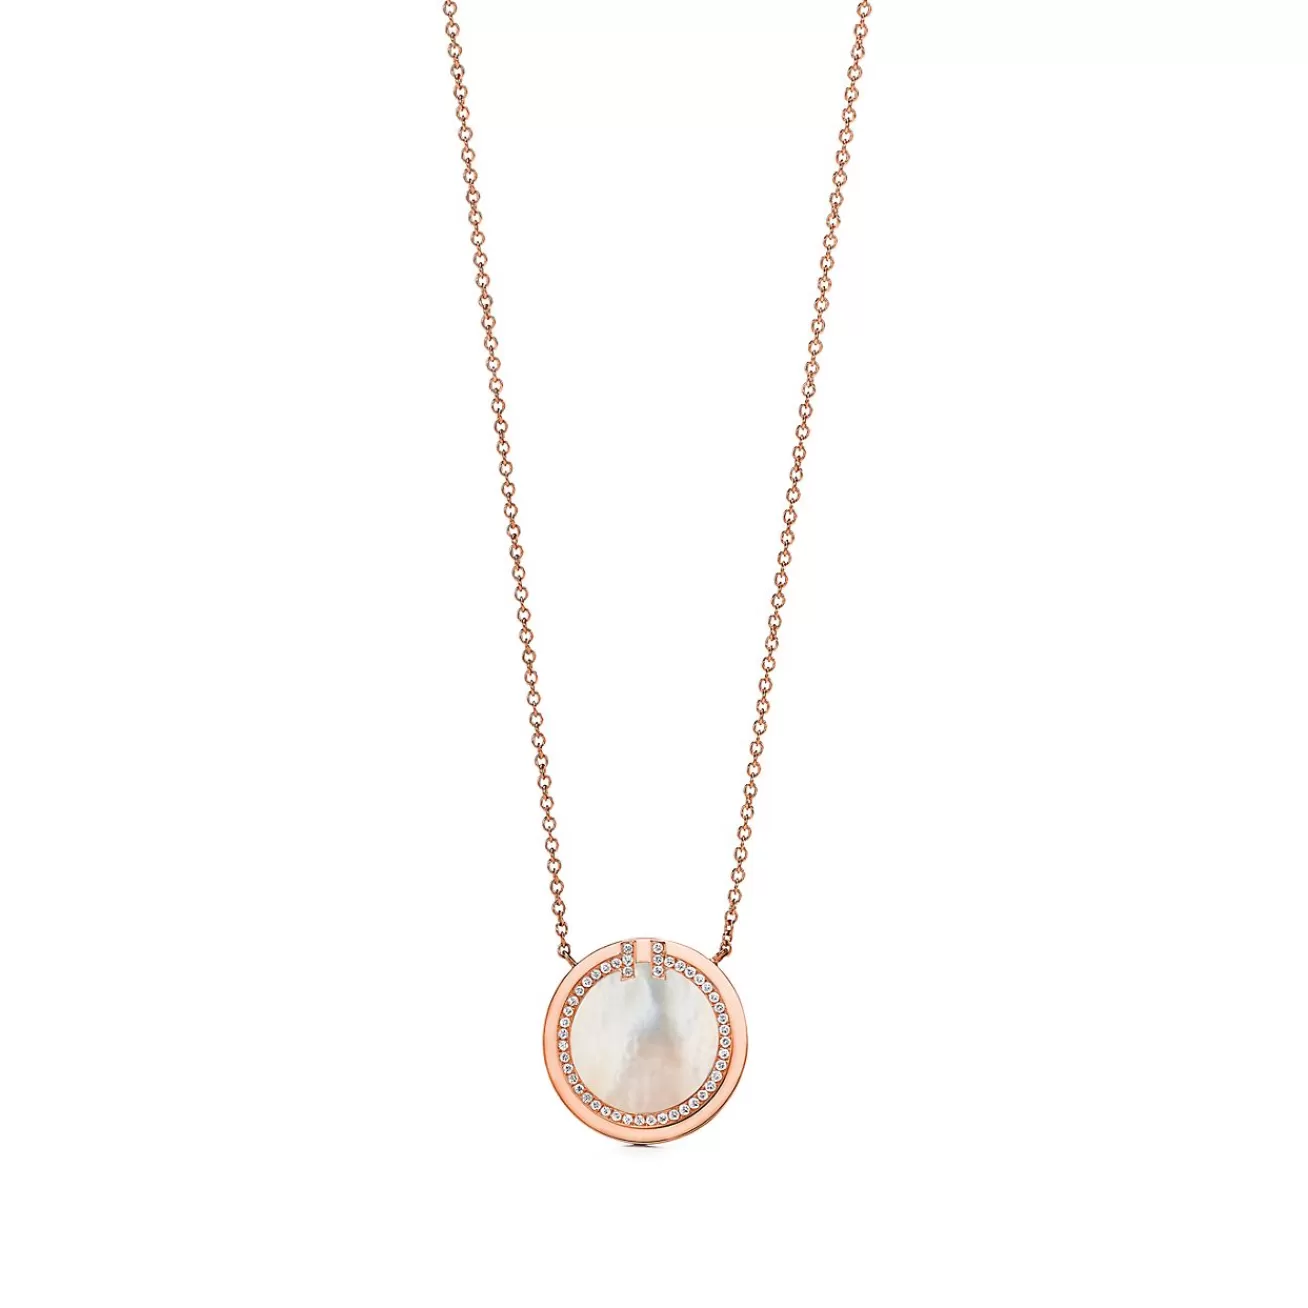 Tiffany & Co. Tiffany T diamond and mother-of-pearl circle pendant in 18k rose gold. | ^ Necklaces & Pendants | Gifts for Her